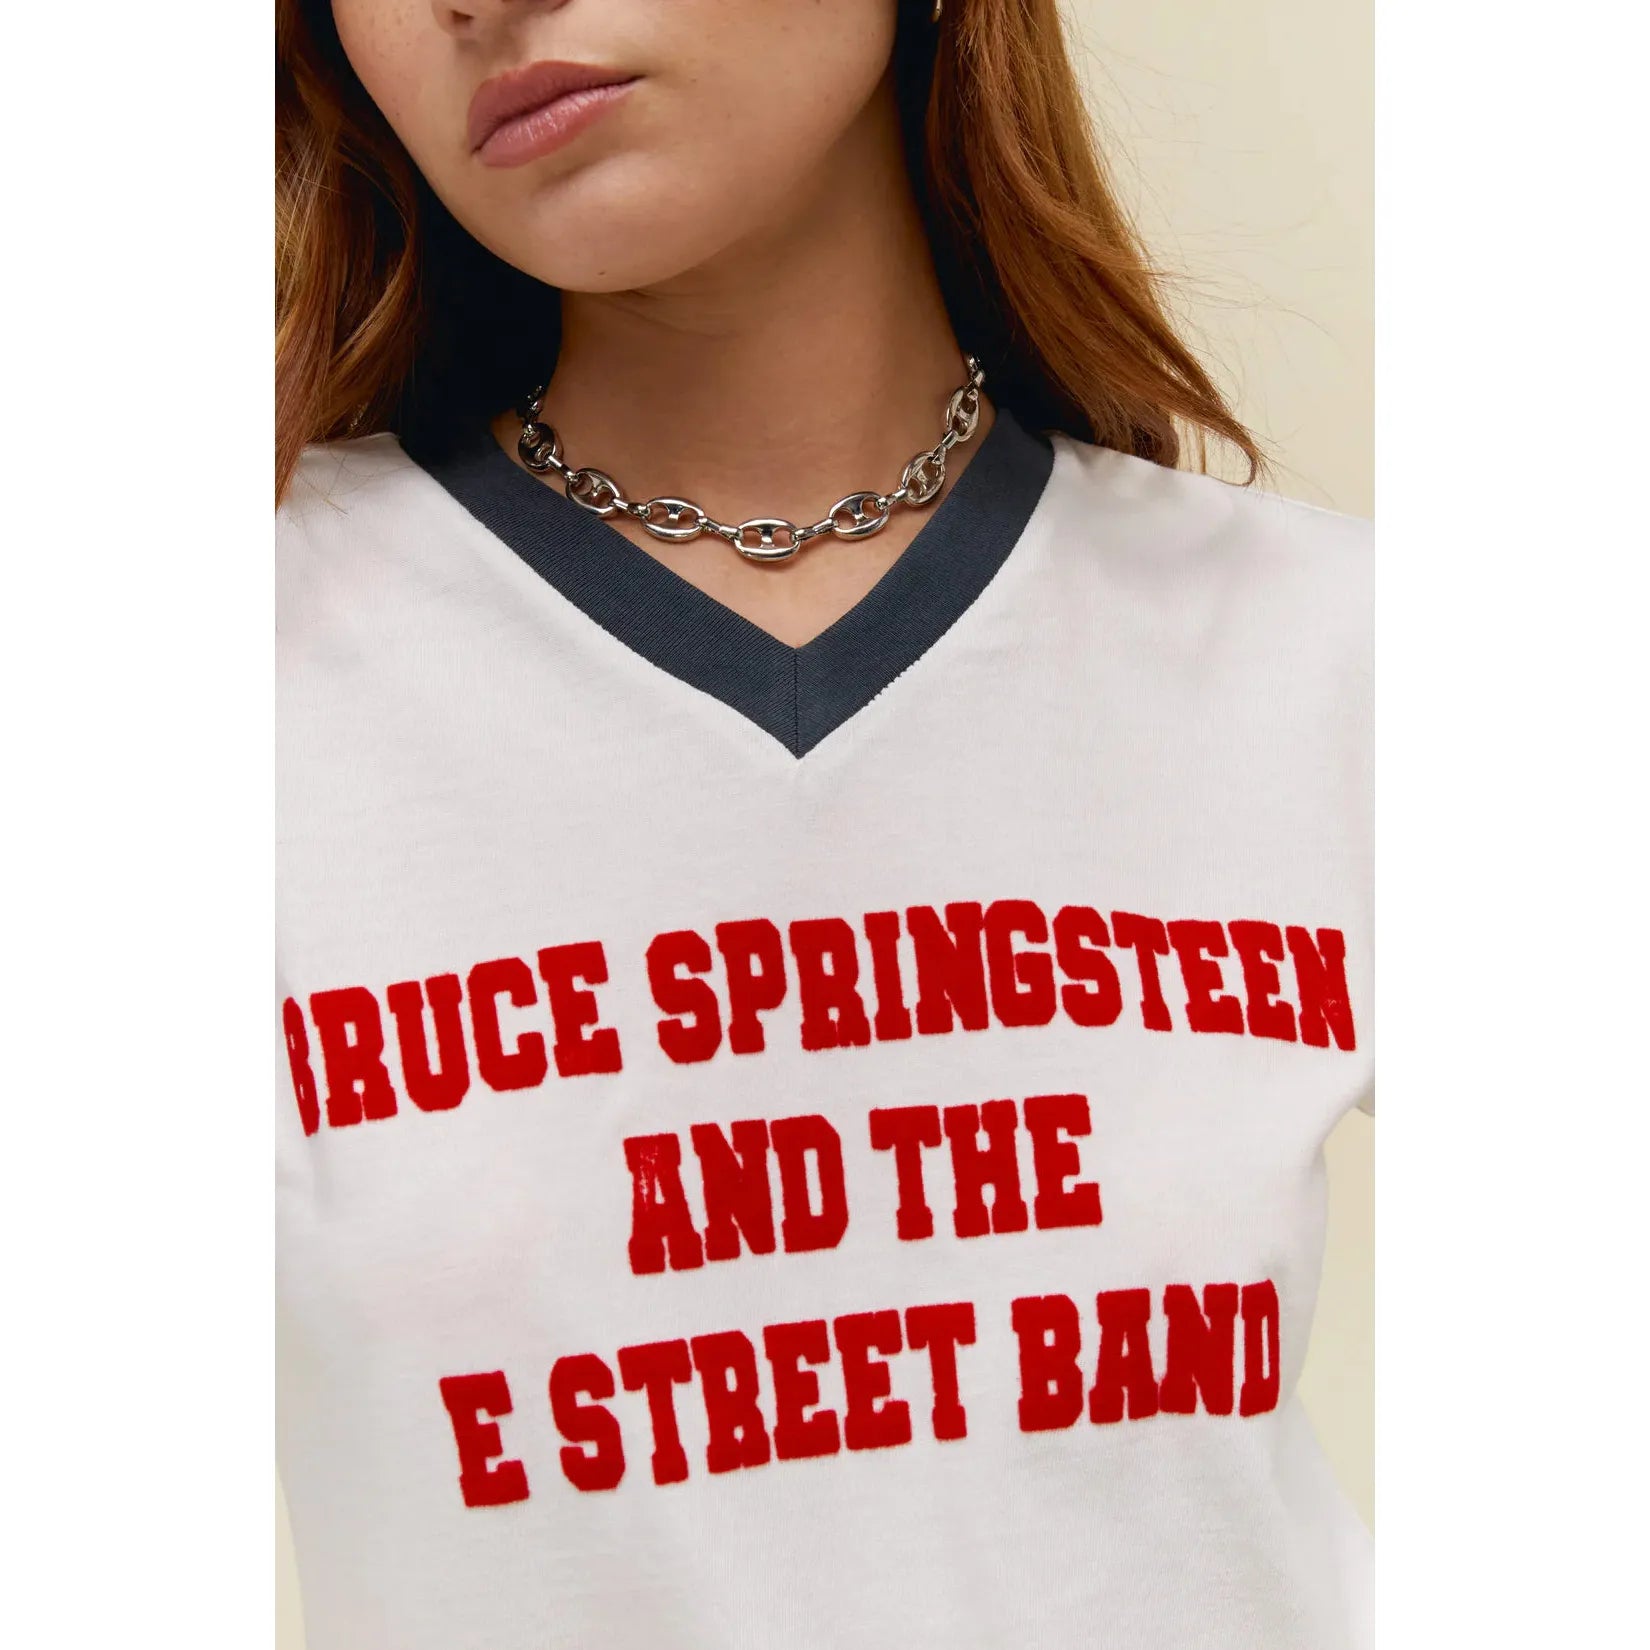 Daydreamer - Bruce Springsteen & The E Street Band Sporty Tee in Vintage White